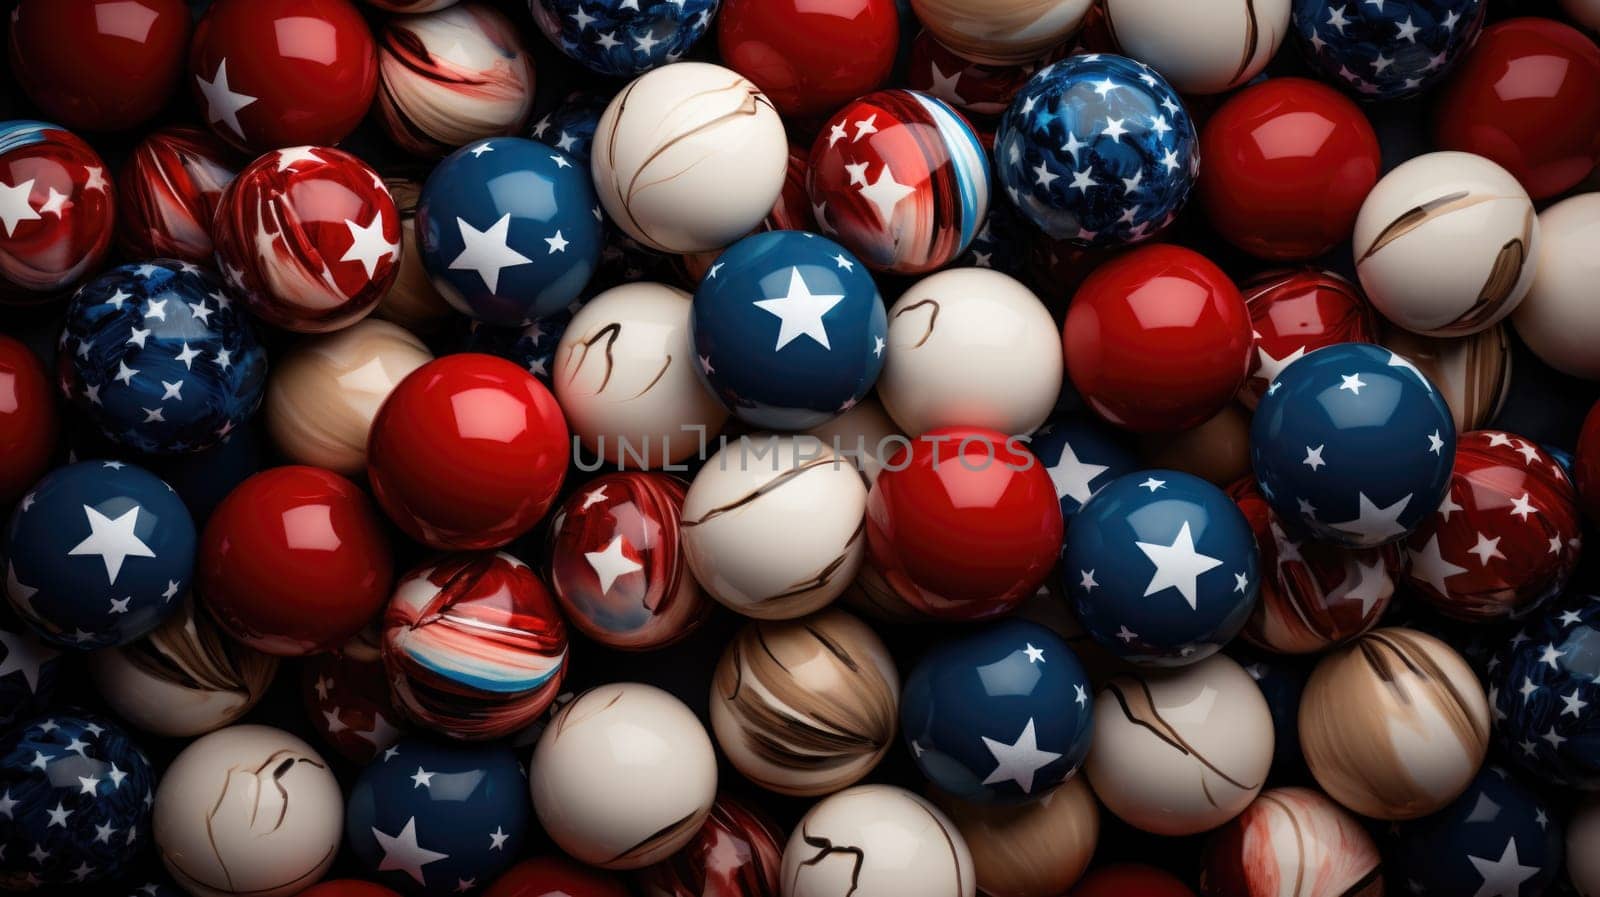 Festive Pile of Red, White and Blue Balls by but_photo